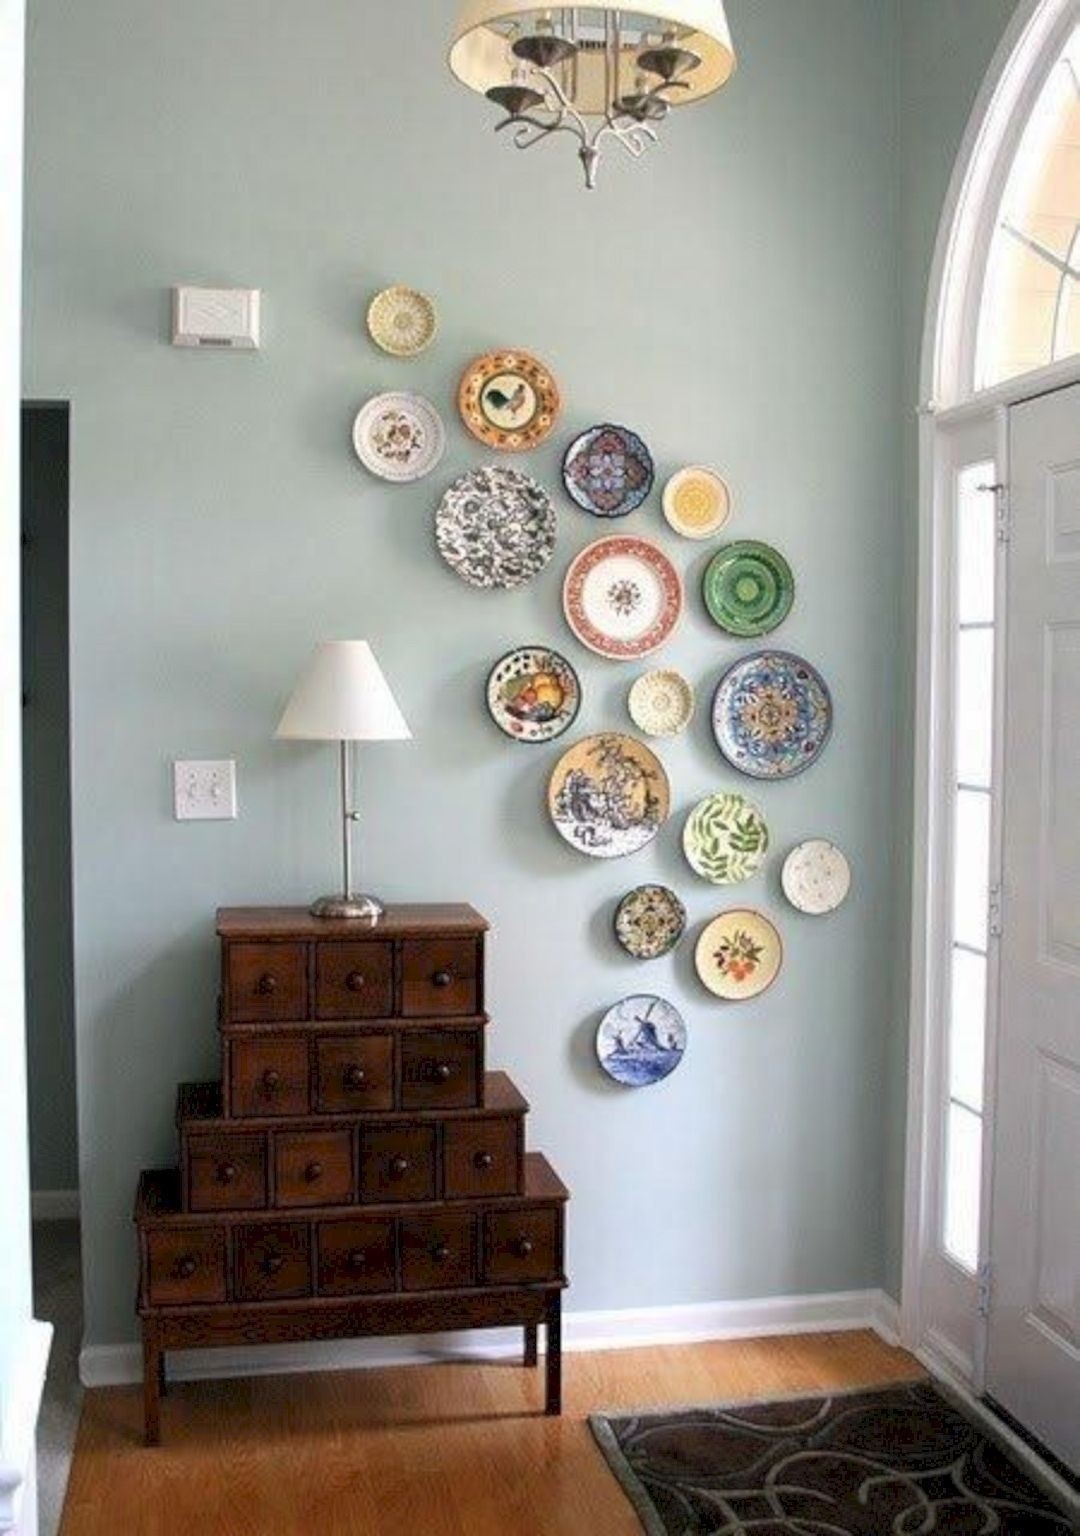 Decorative plates for wall hanging